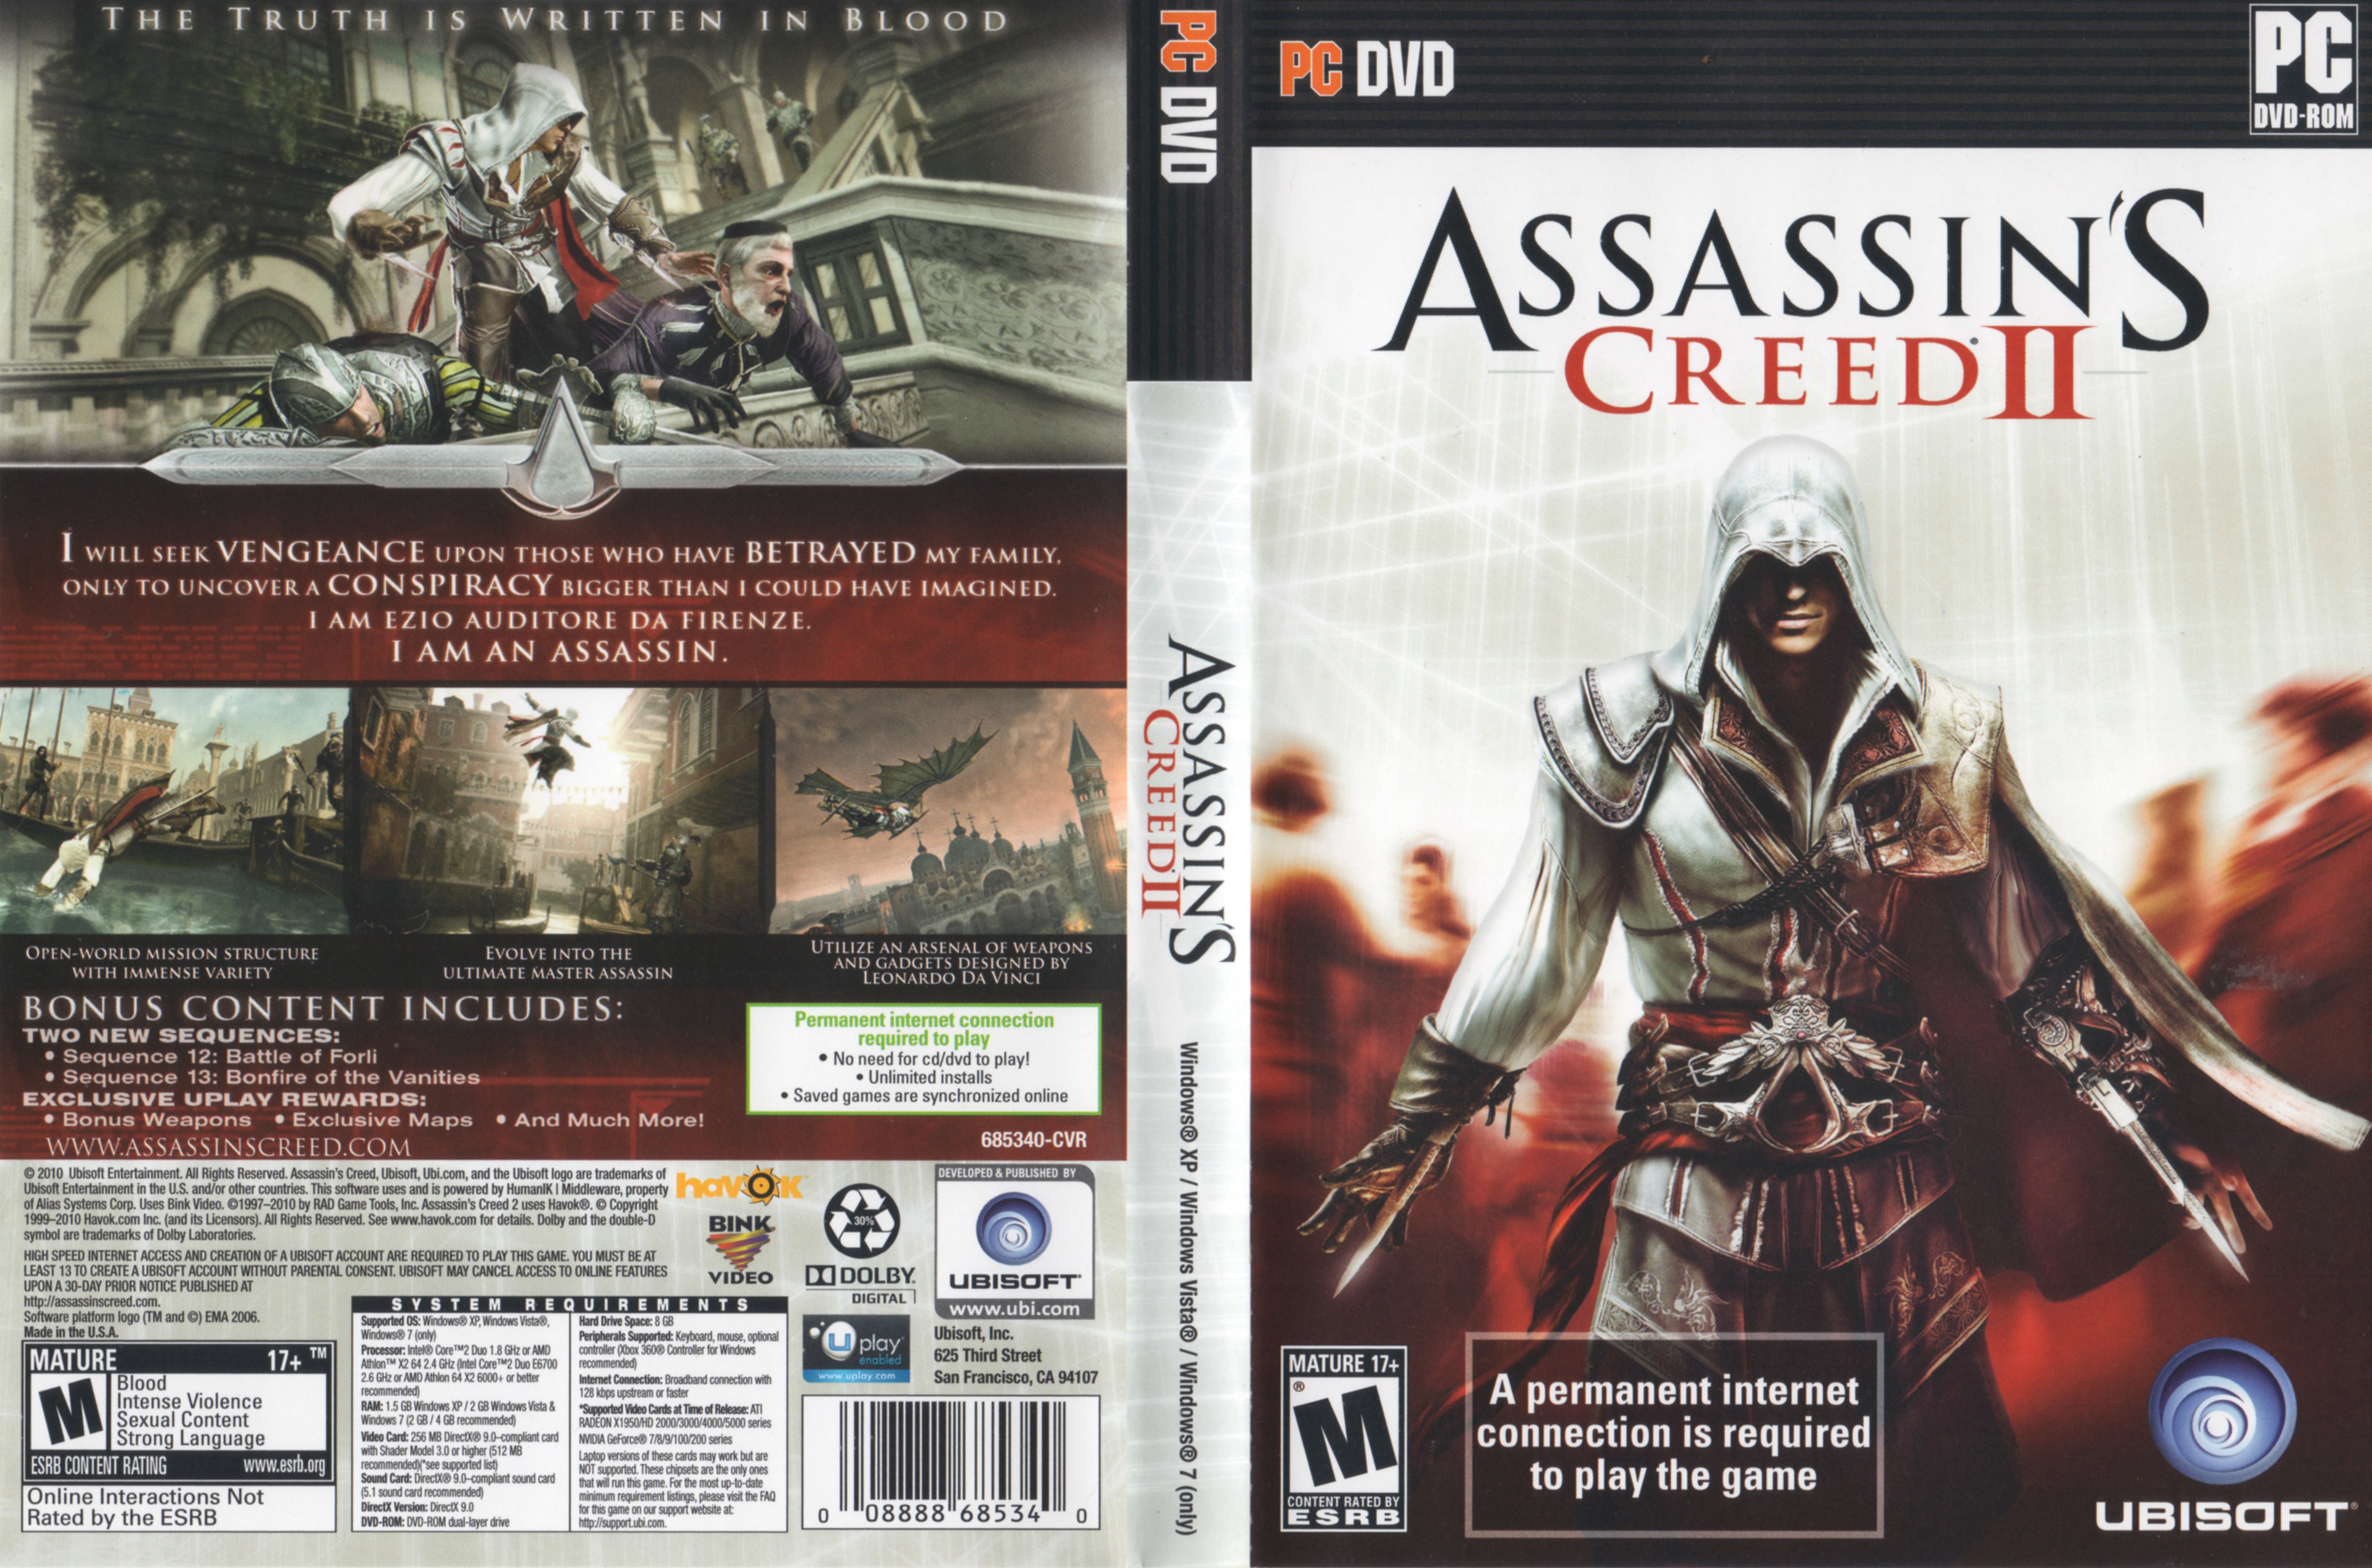 Assassin games 2. Assassins Creed 2 Xbox 360 обложка. Диск ассасин Крид 2 ps3. Assassins Creed 2 диск. Assassin's Creed 2 DVD PC.